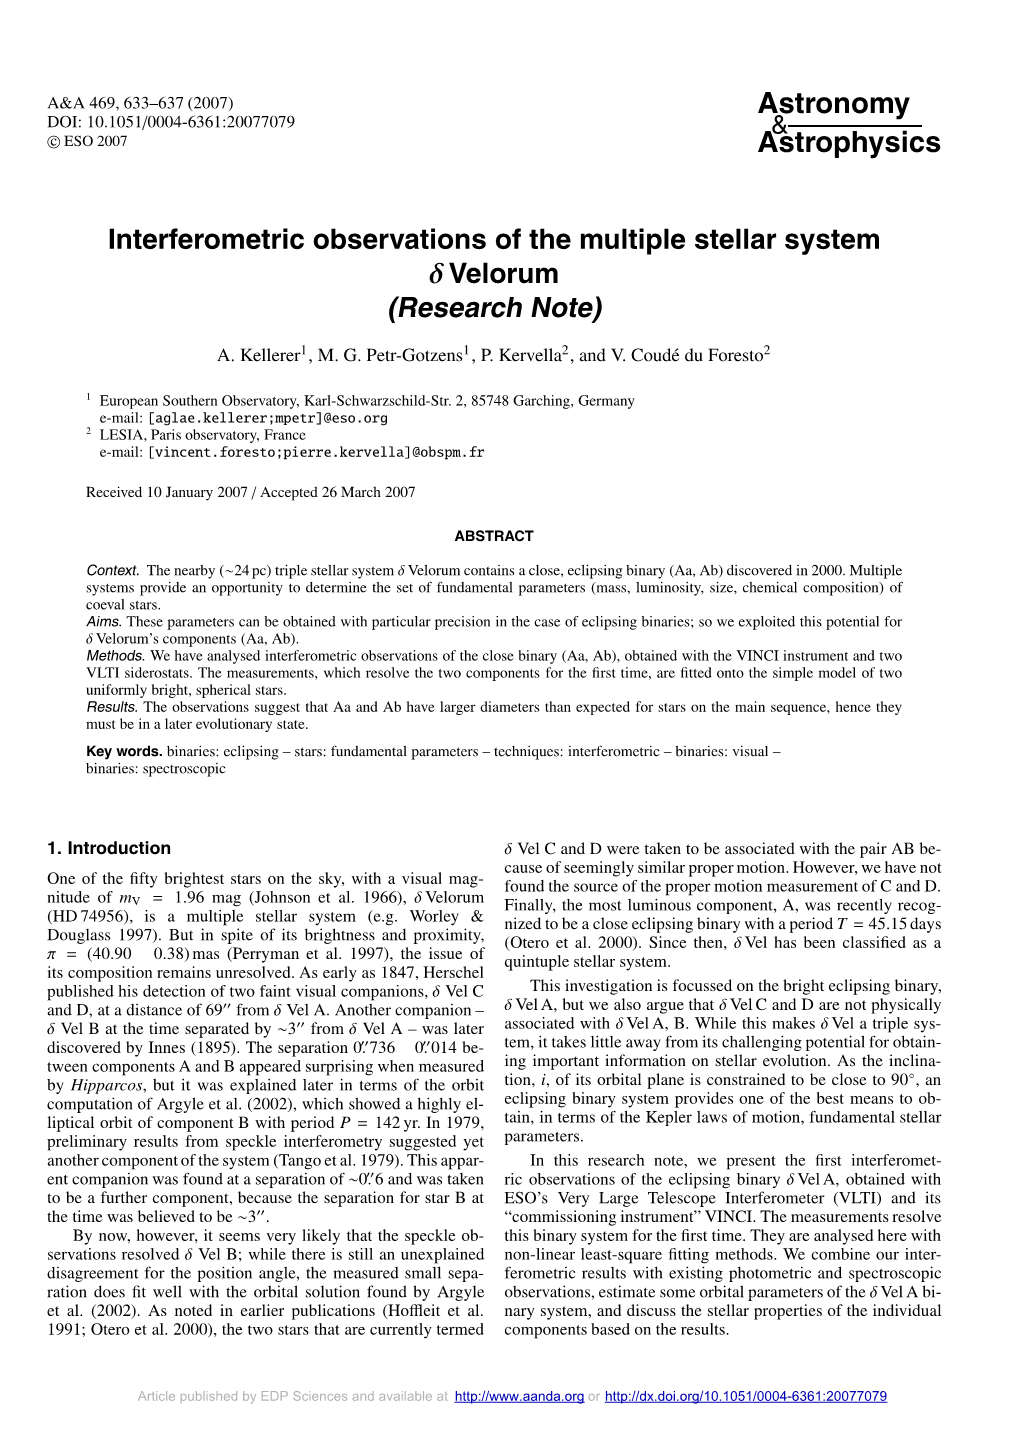 Interferometric Observations of the Multiple Stellar System Δ Velorum (Research Note)